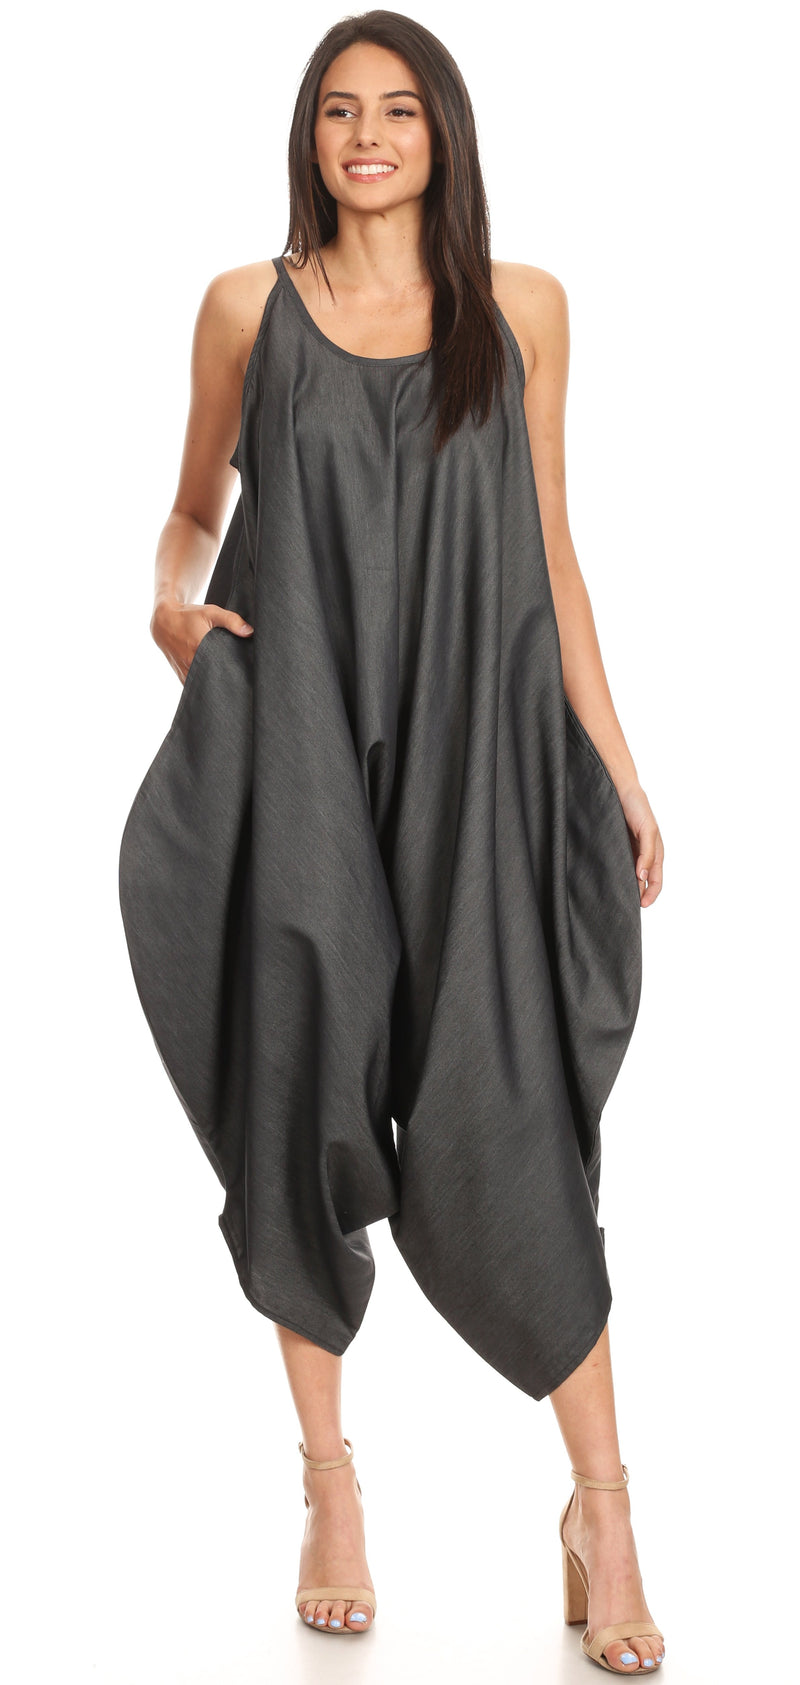 Sakkas Latrice Balloon Sleeveless Relax Fit Jumpsuit Tent with Pockets Unique